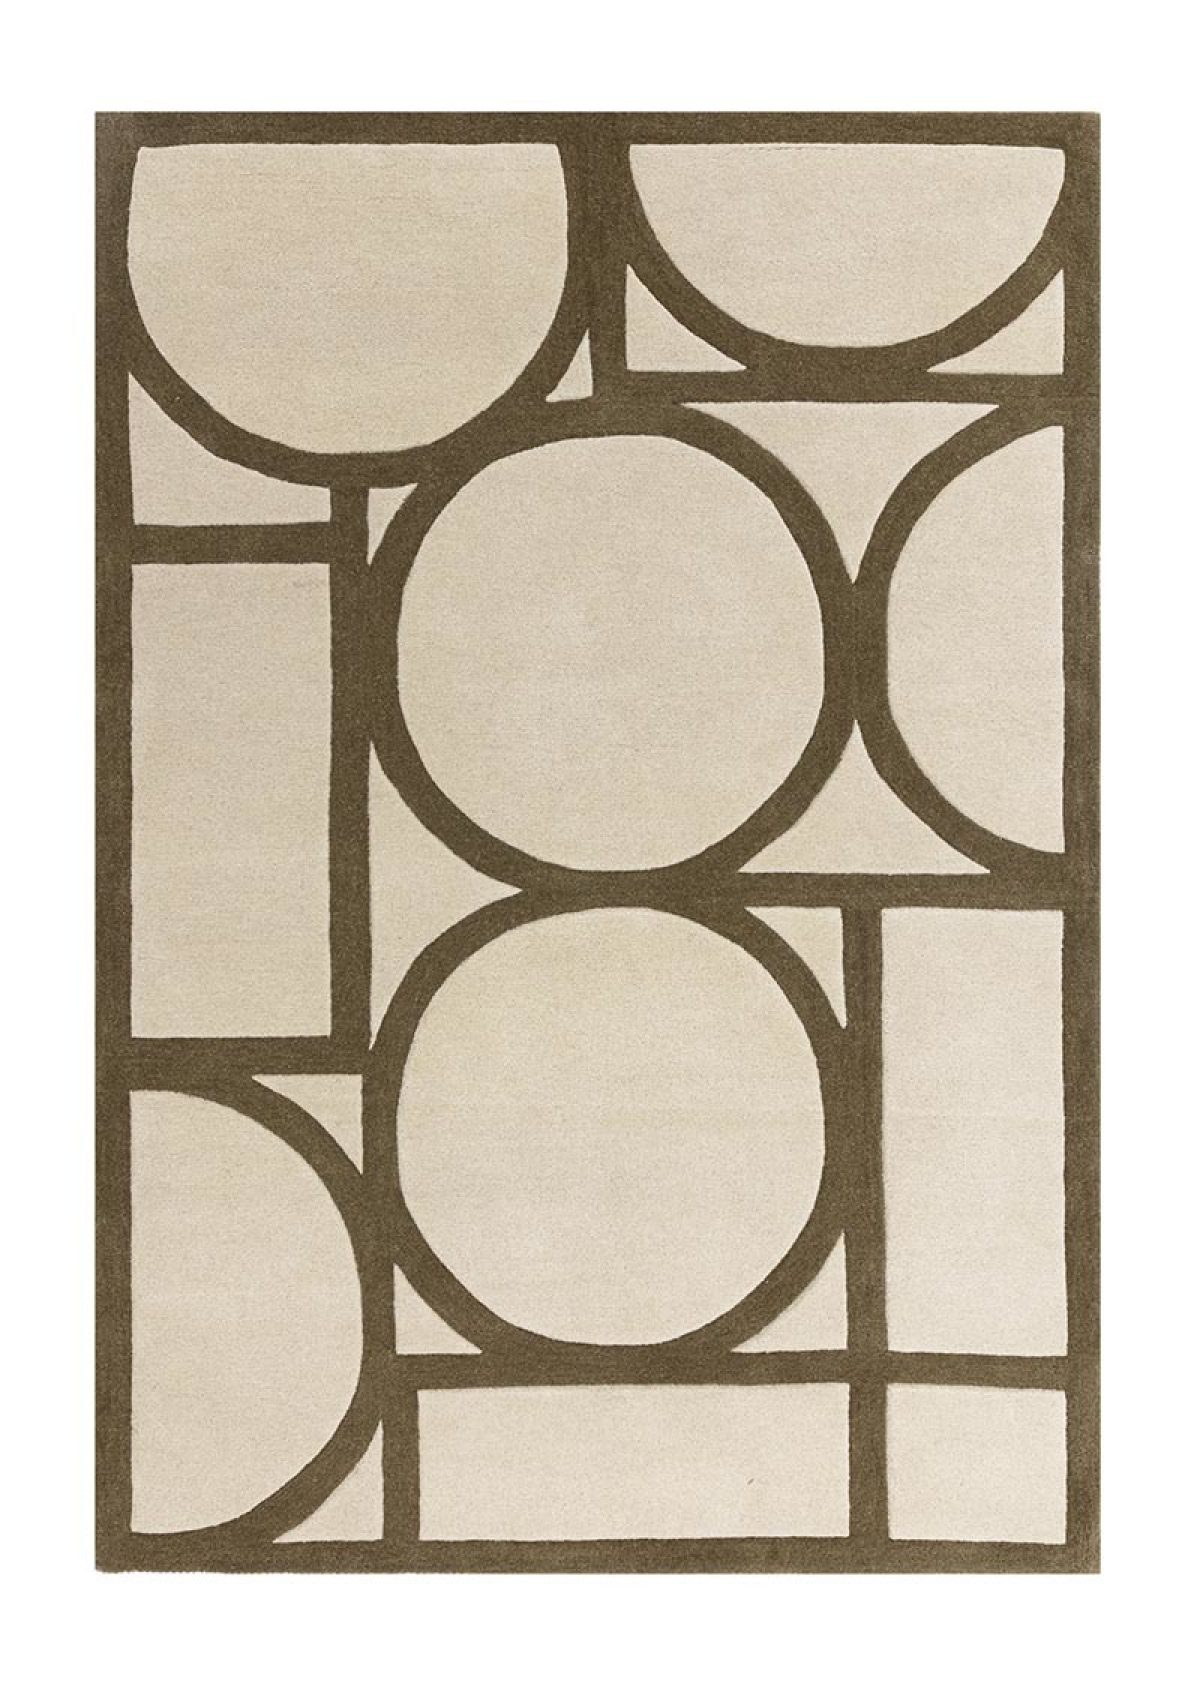 From the living room to the bedroom, this kahki rug compliments any space.